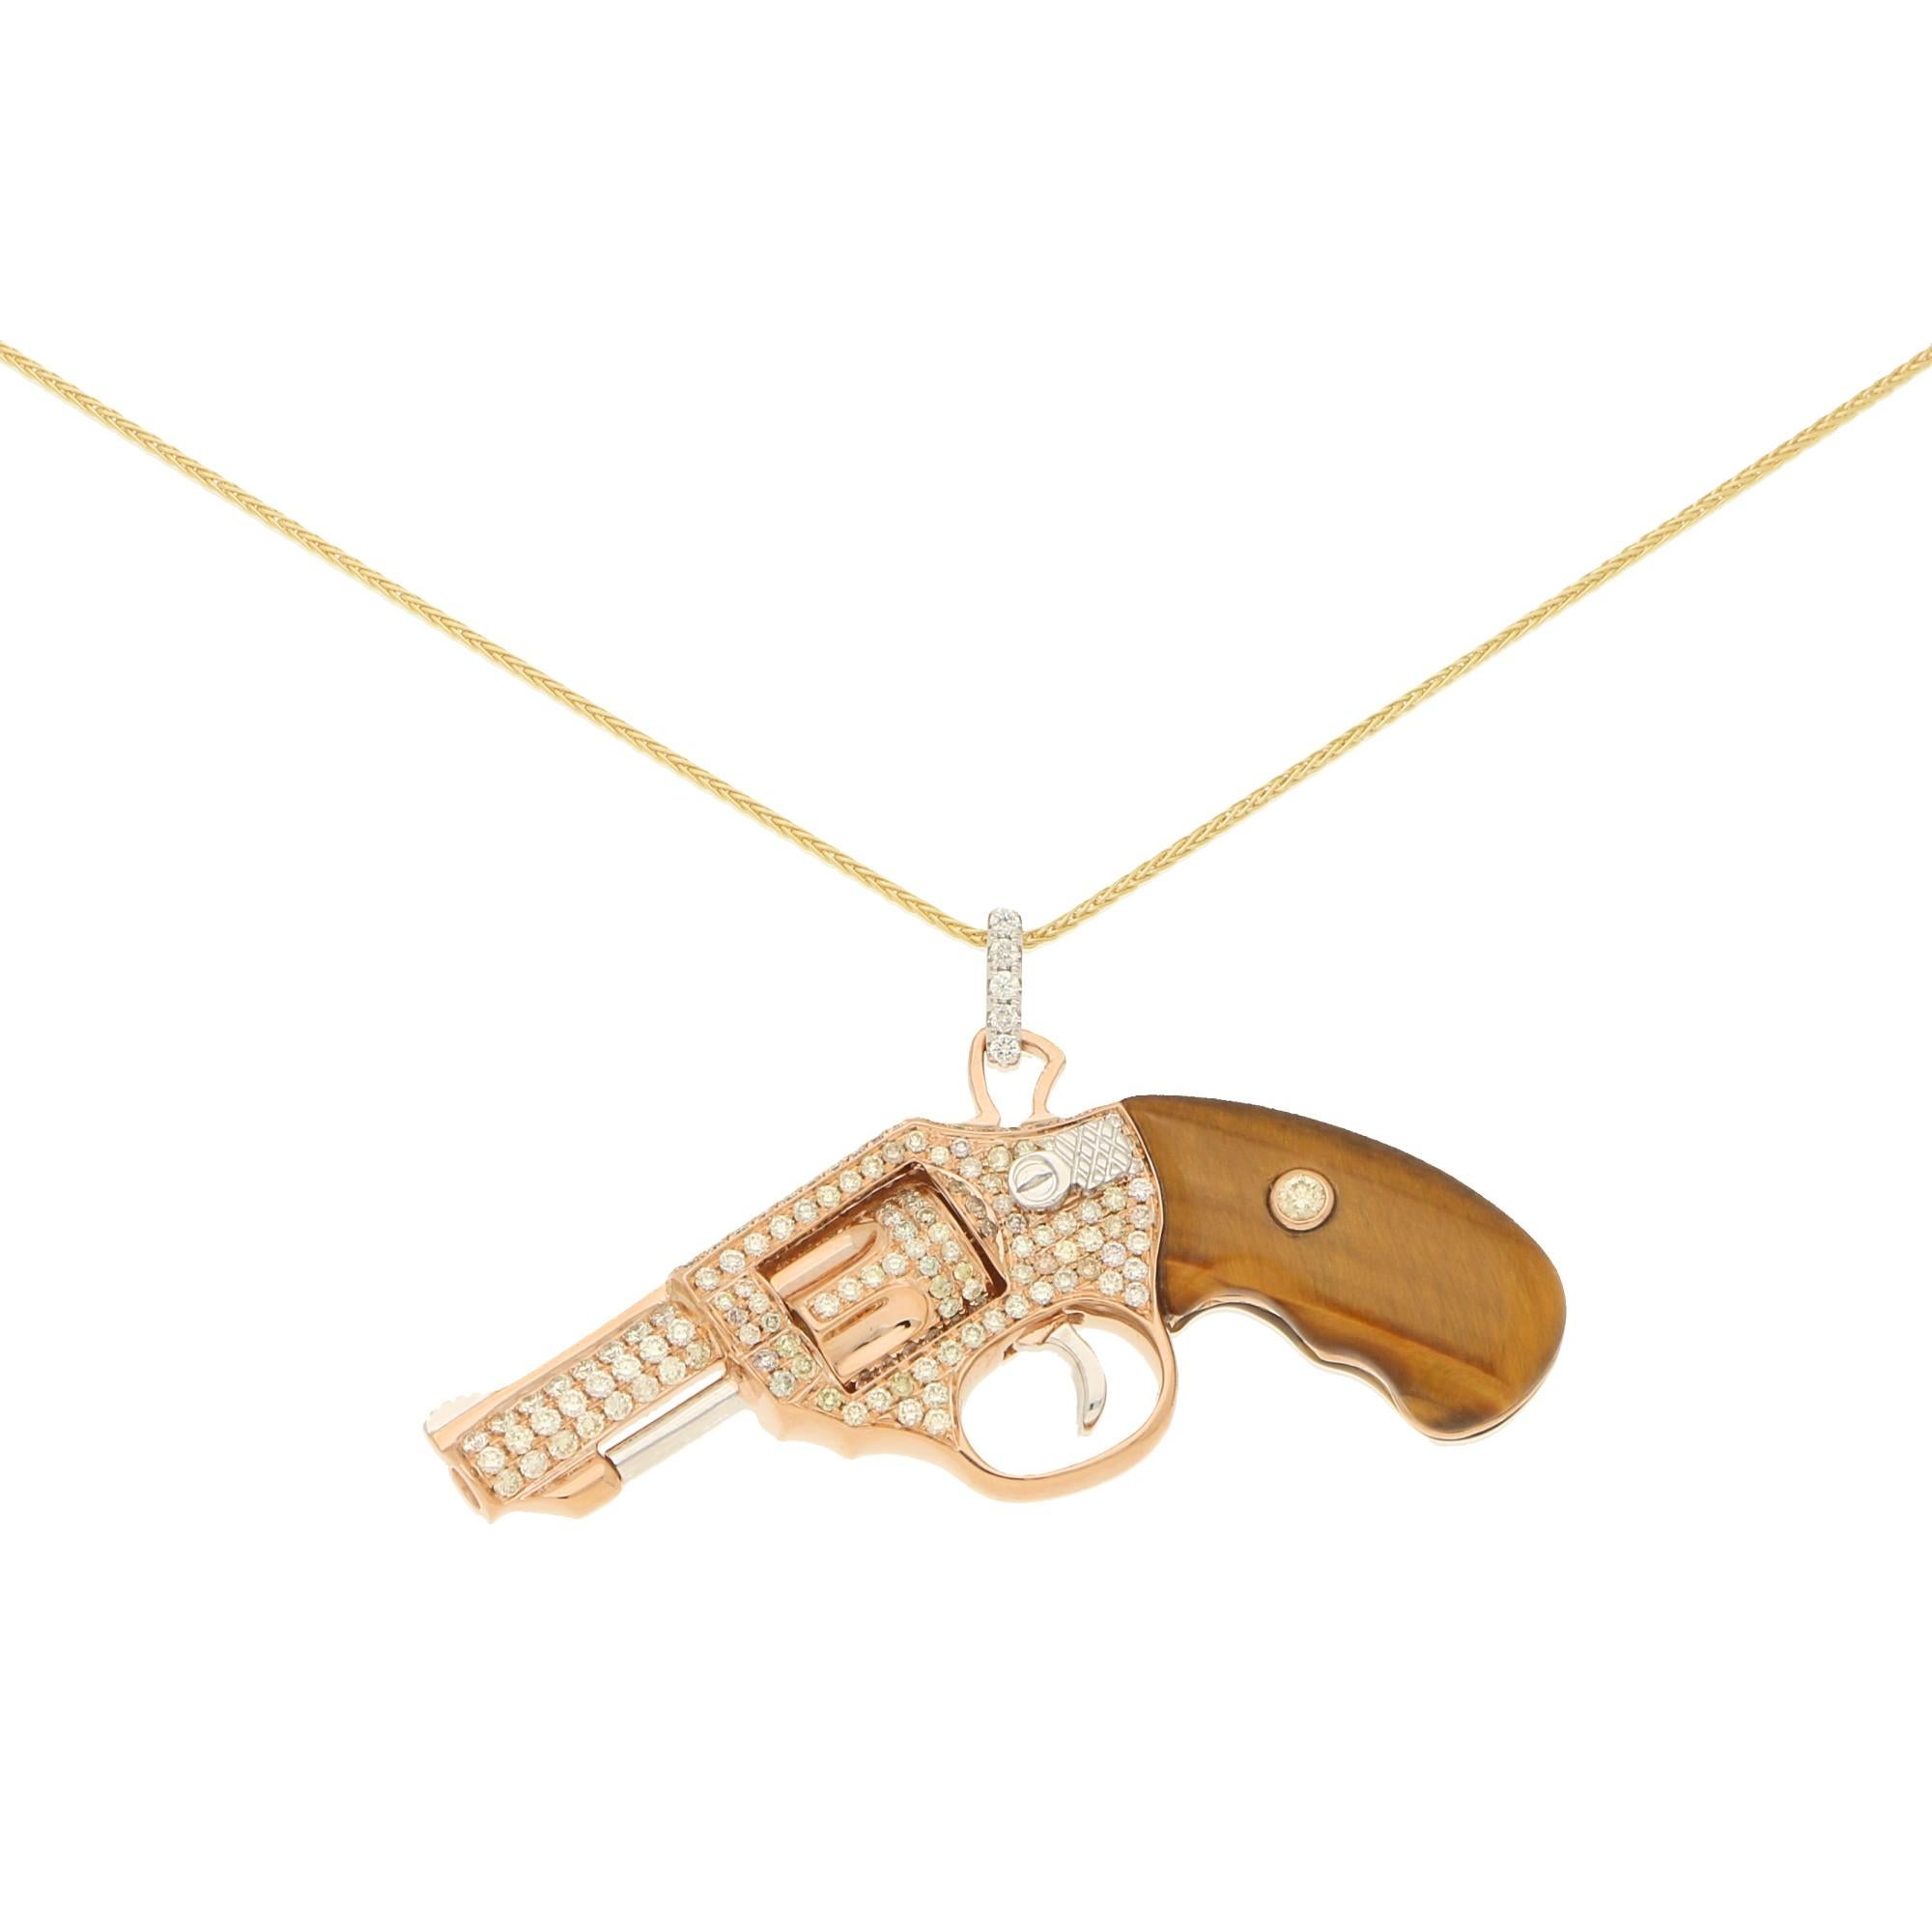 Round Cut Diamond and Tigers Eye Jewelled Revolver Pendant Set in 18k Rose Gold